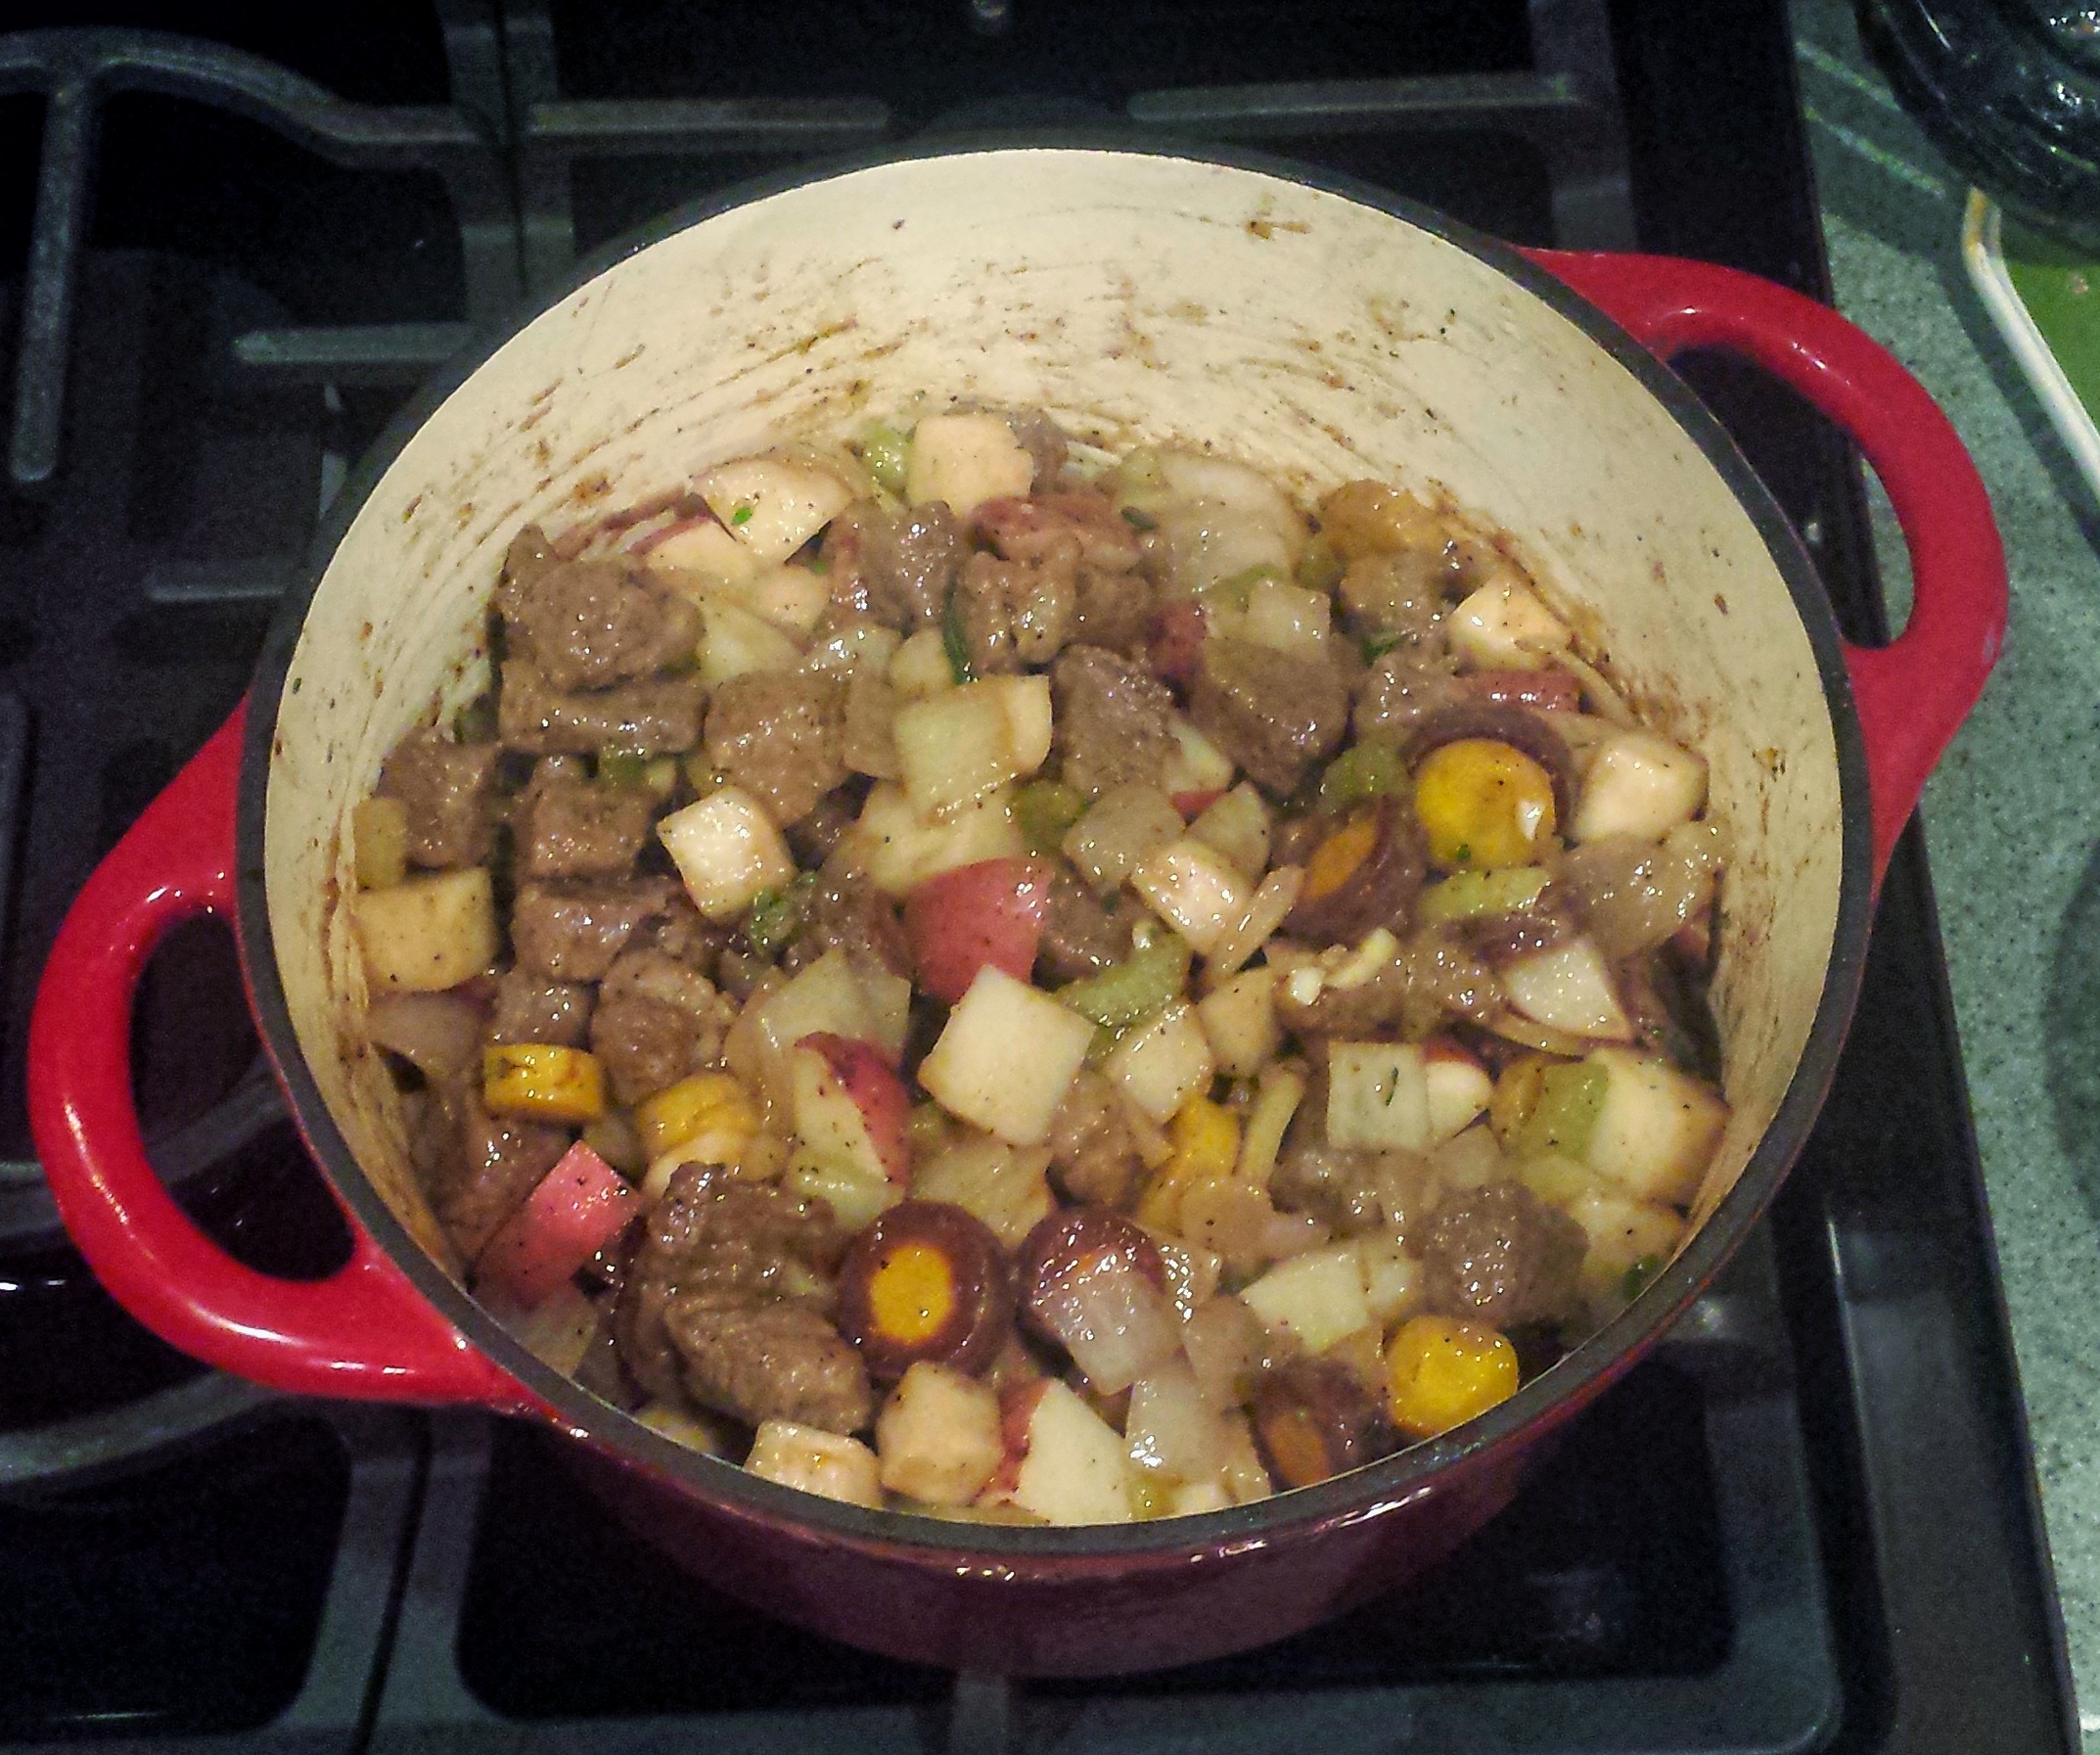 The beef has been added to the vegetables and spices.